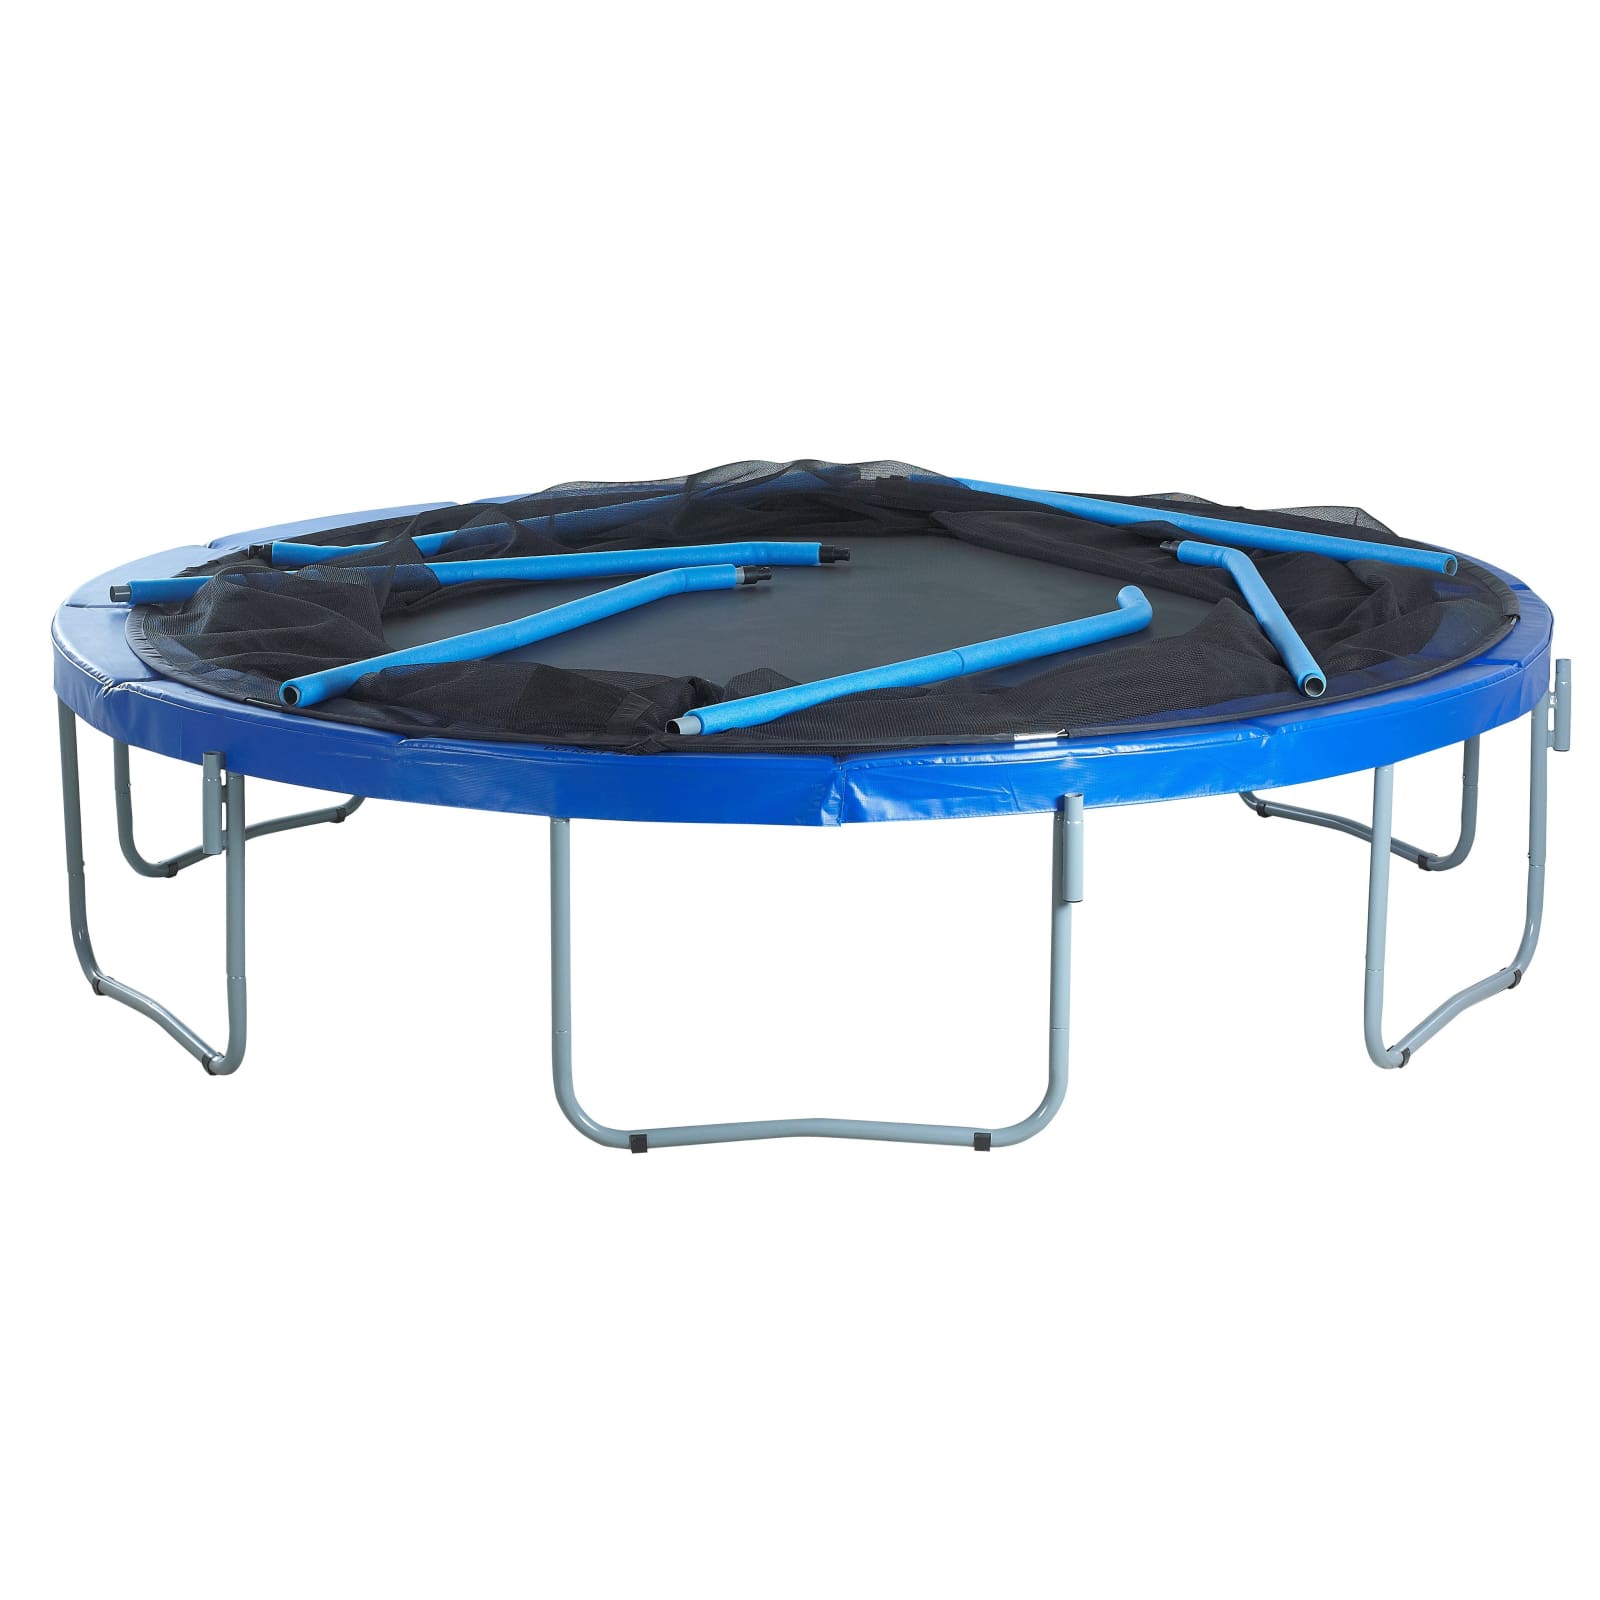 BouncyTrampolines - Skytric 13 ft Trampoline W/ Top Ring Enclosure System -  UBSF02-13 – Bouncy Trampolines